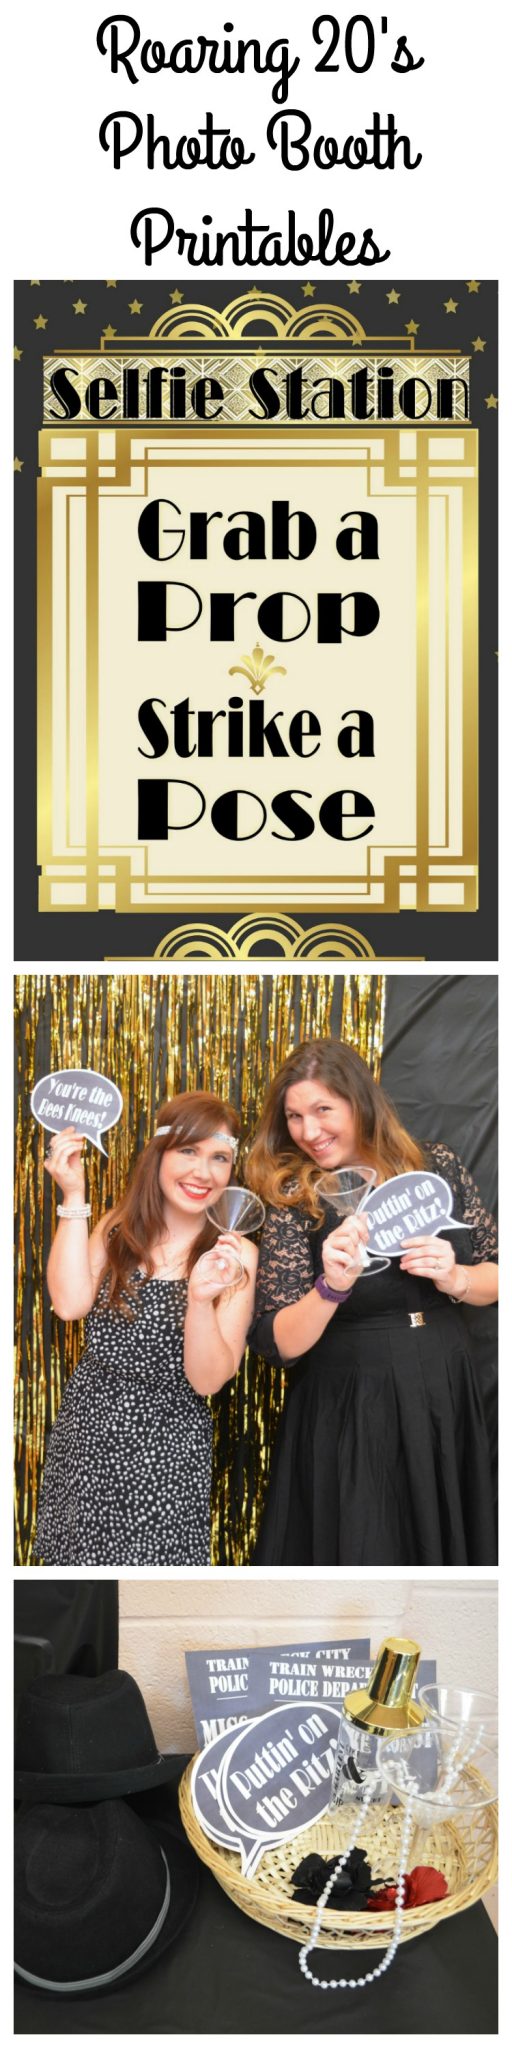 Roaring 20's Photo Booth Printables